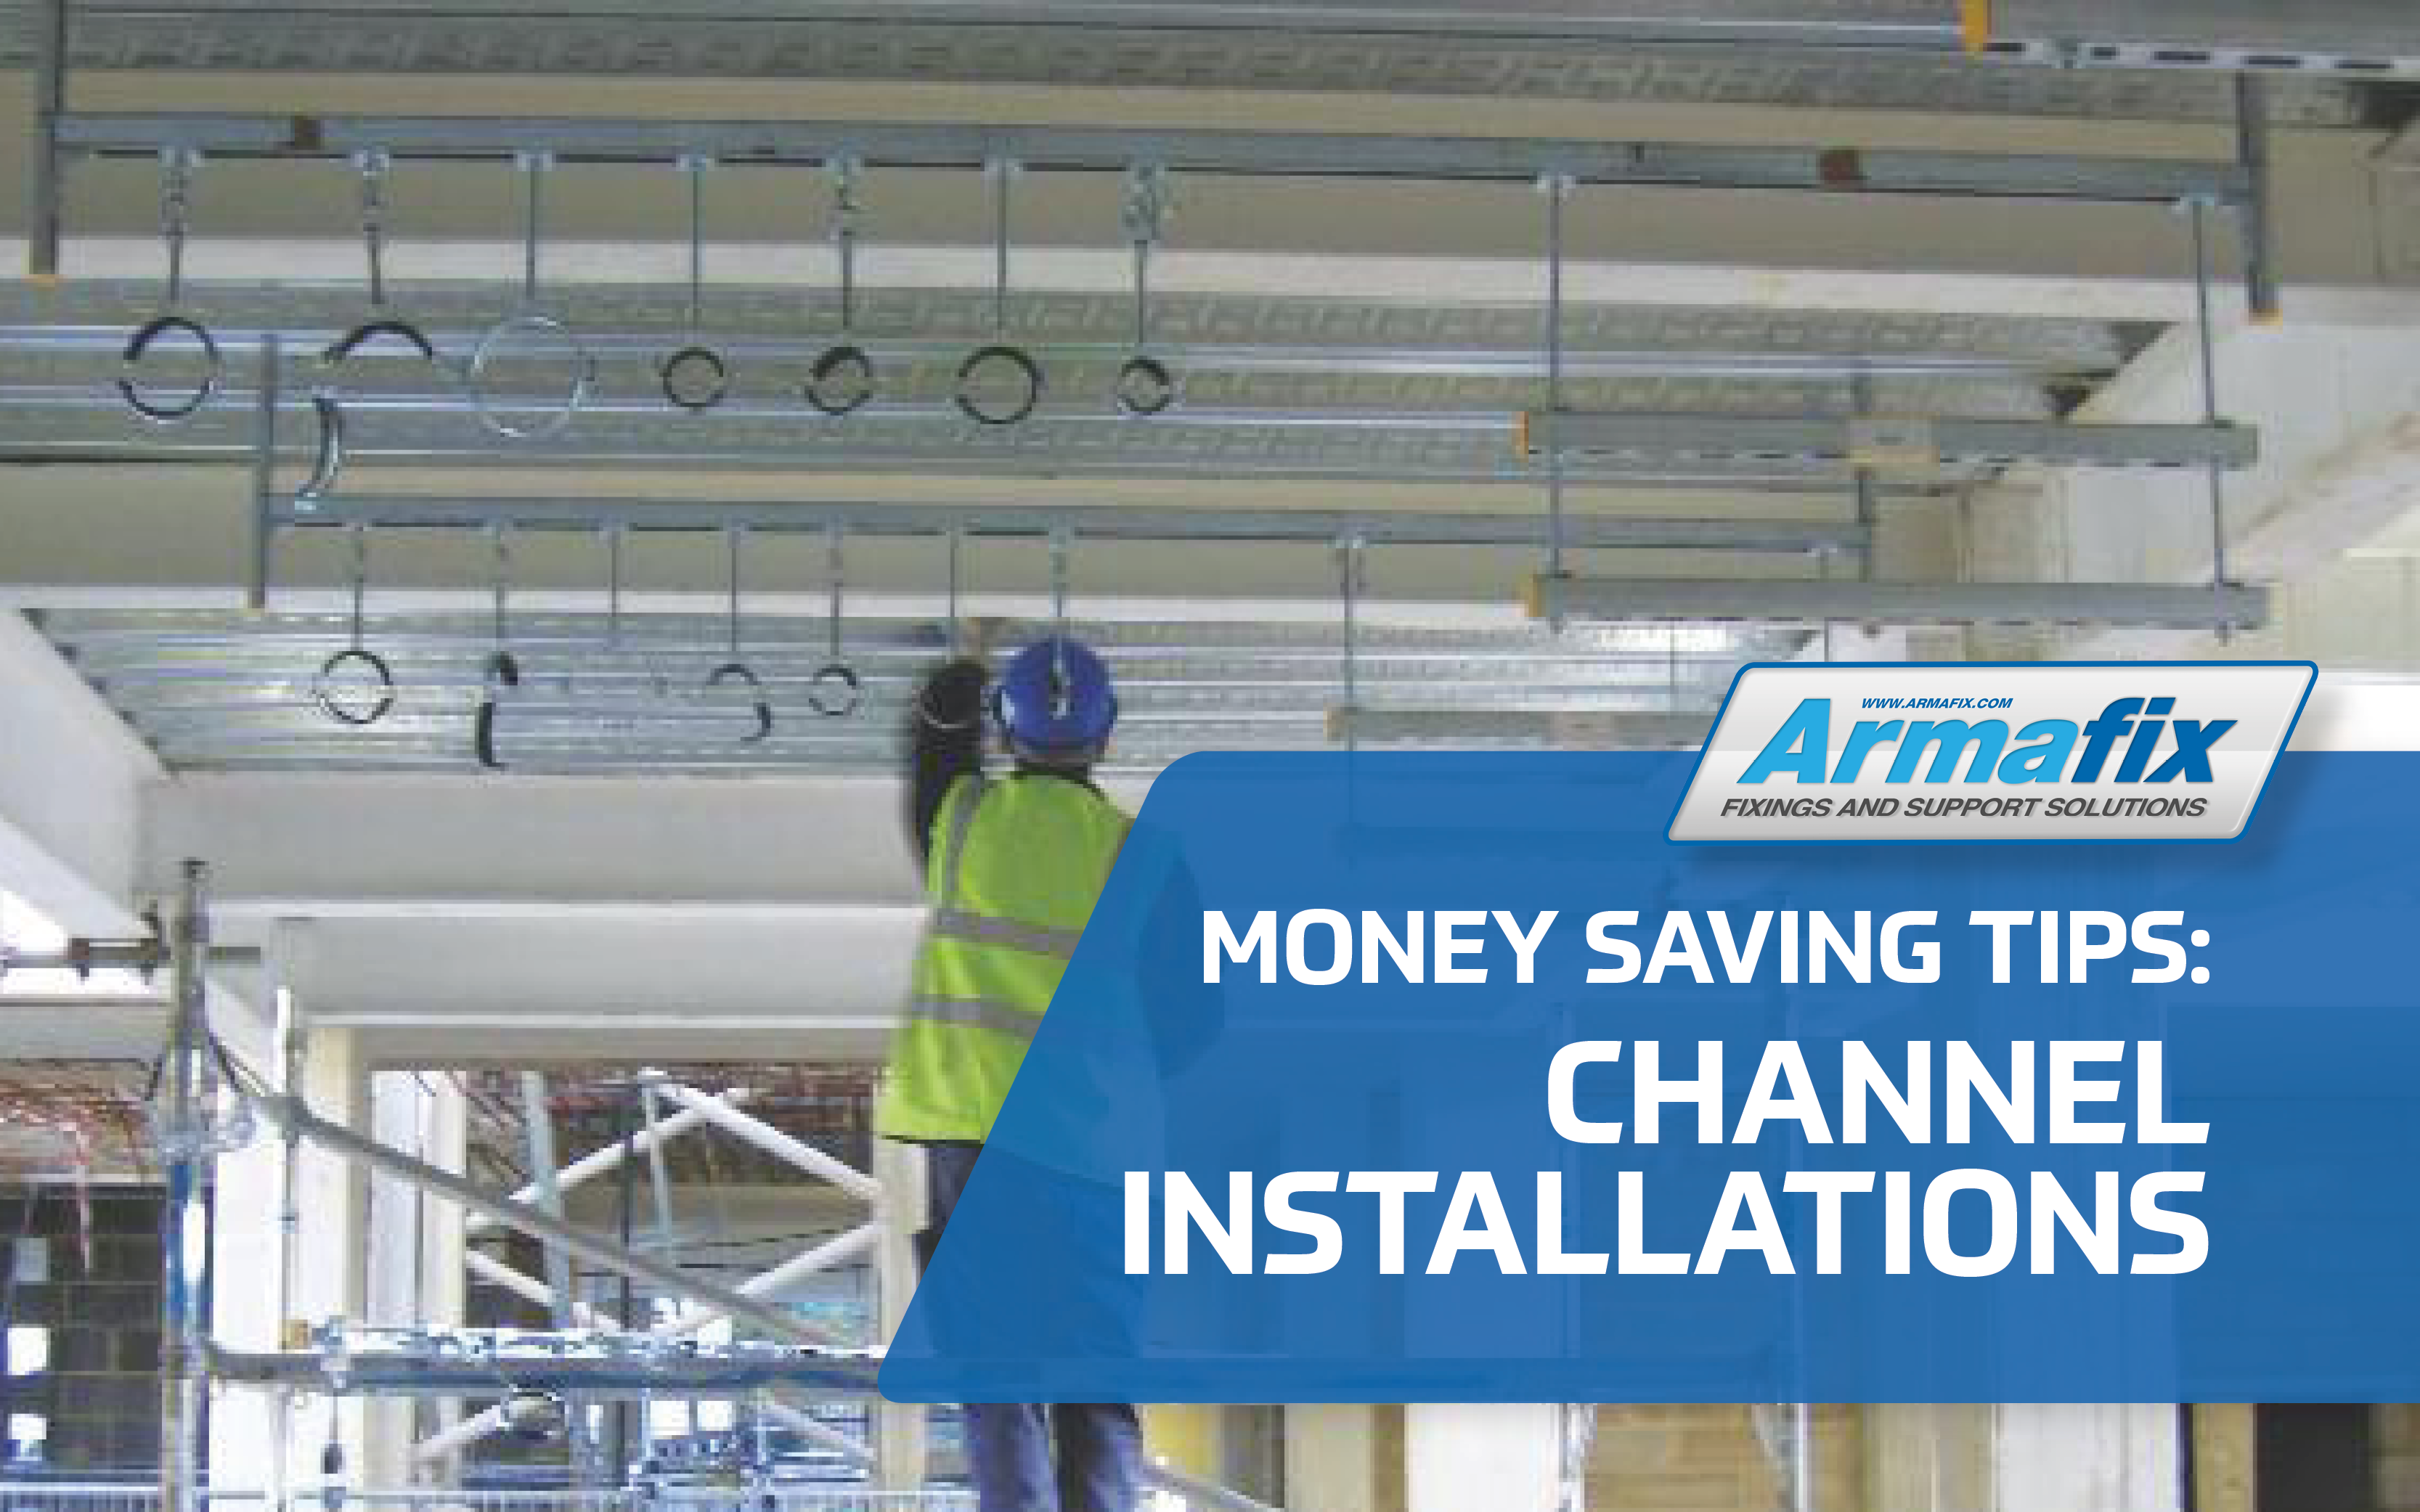 How to Save Money on Channel Installations: Money Saving Tips from Armafix